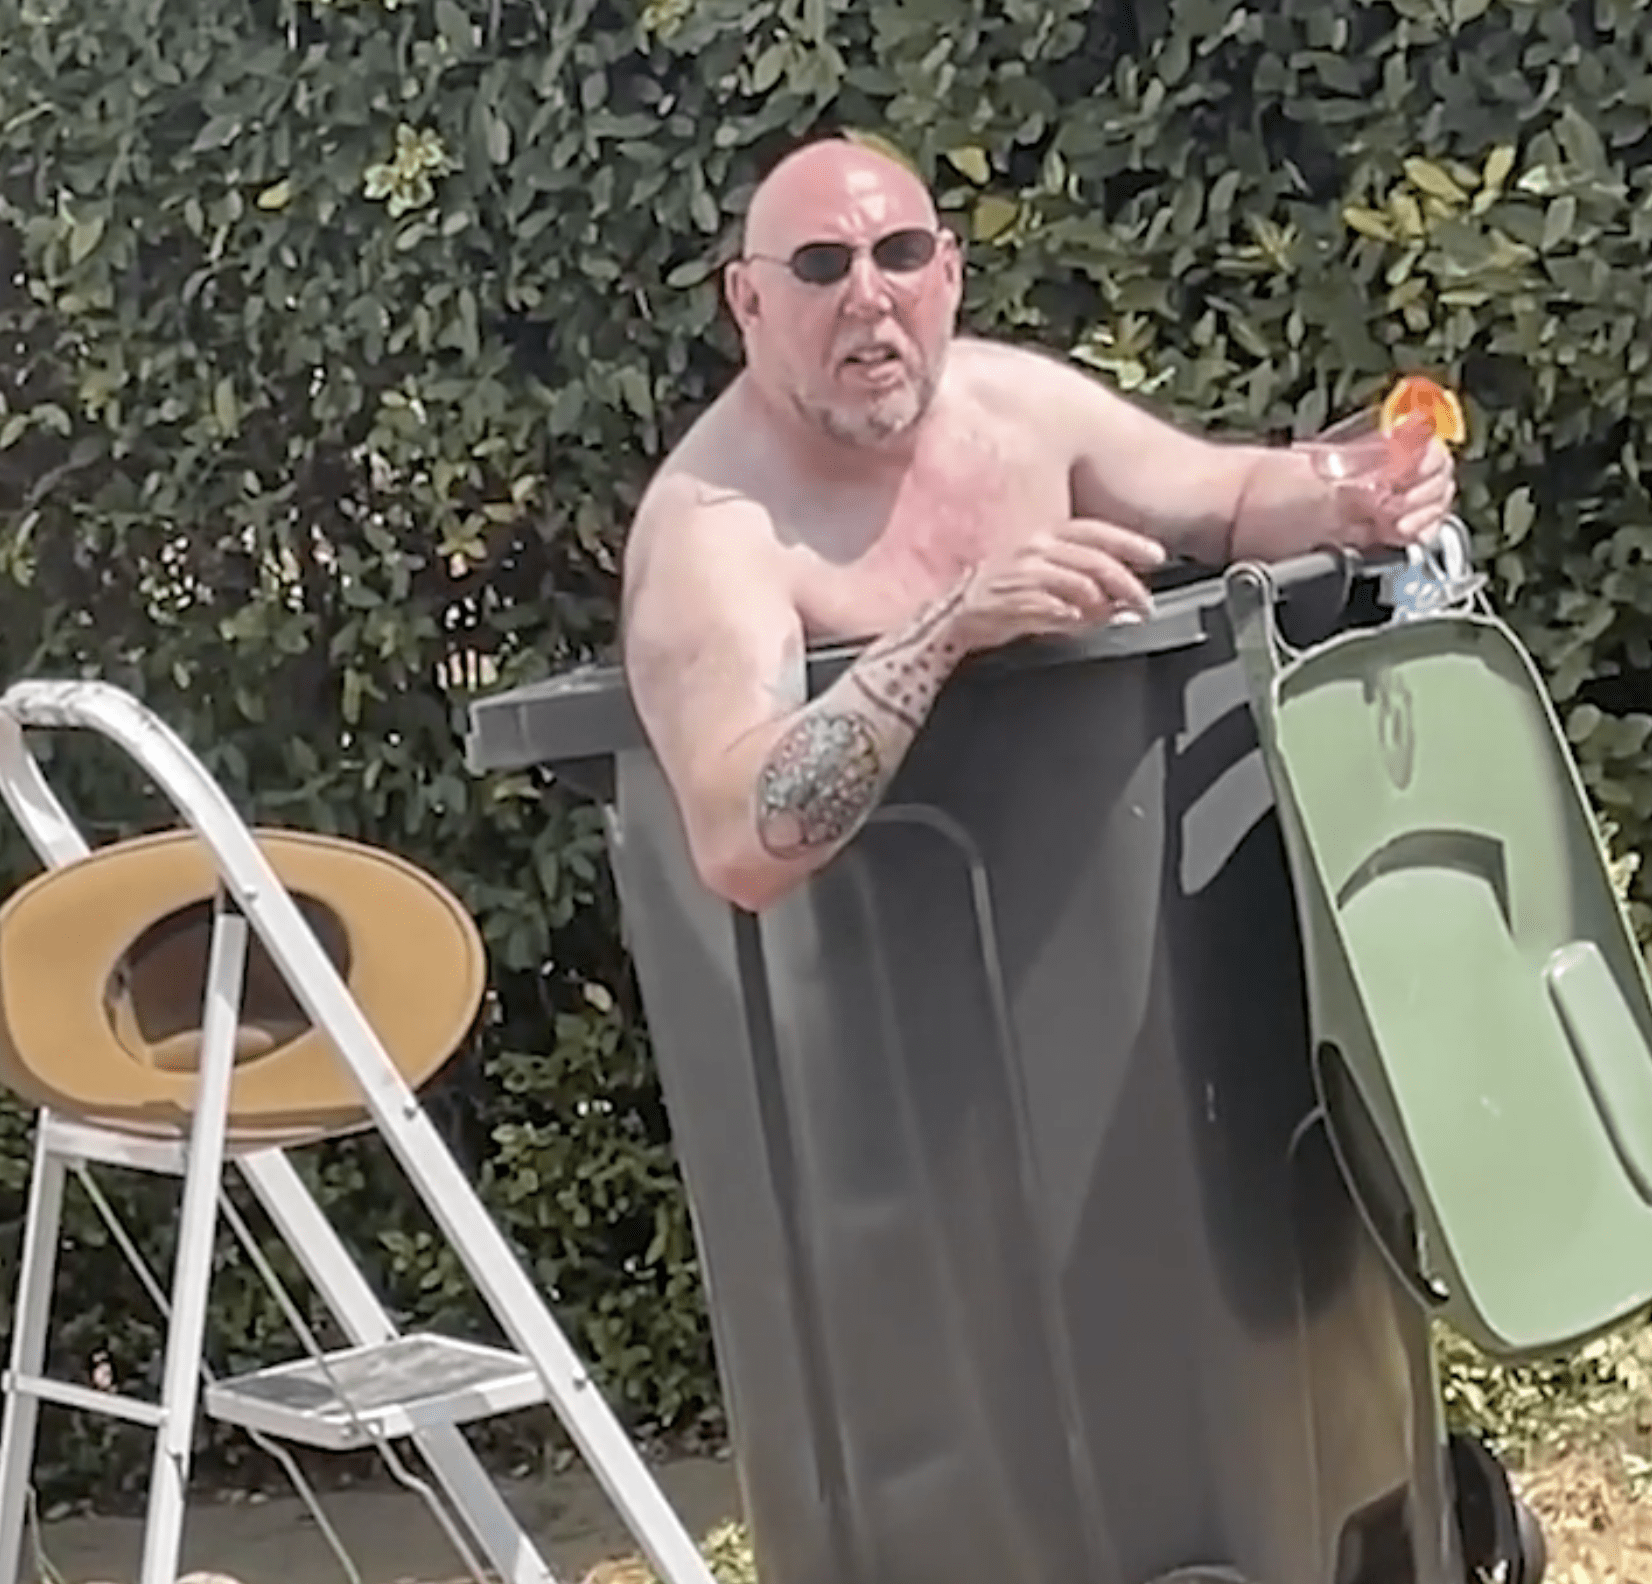 Bloke with a cocktail cools off in a trash barrel